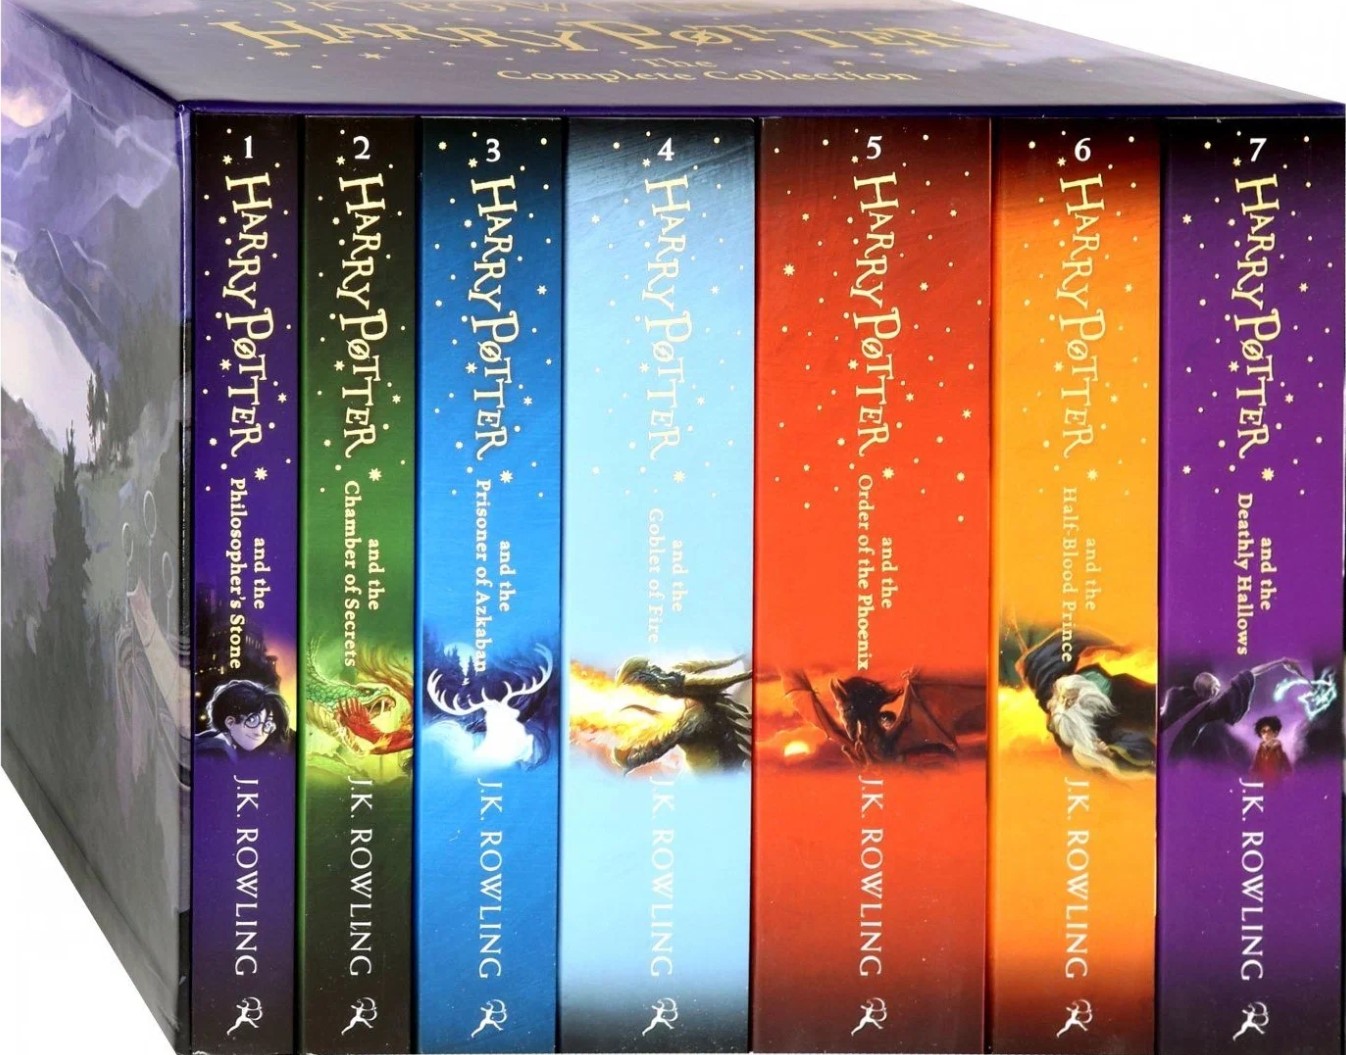 Rowling J.K. Harry Potter Box Set 7 Bk Pb: The Complete Collection (Childrens) 